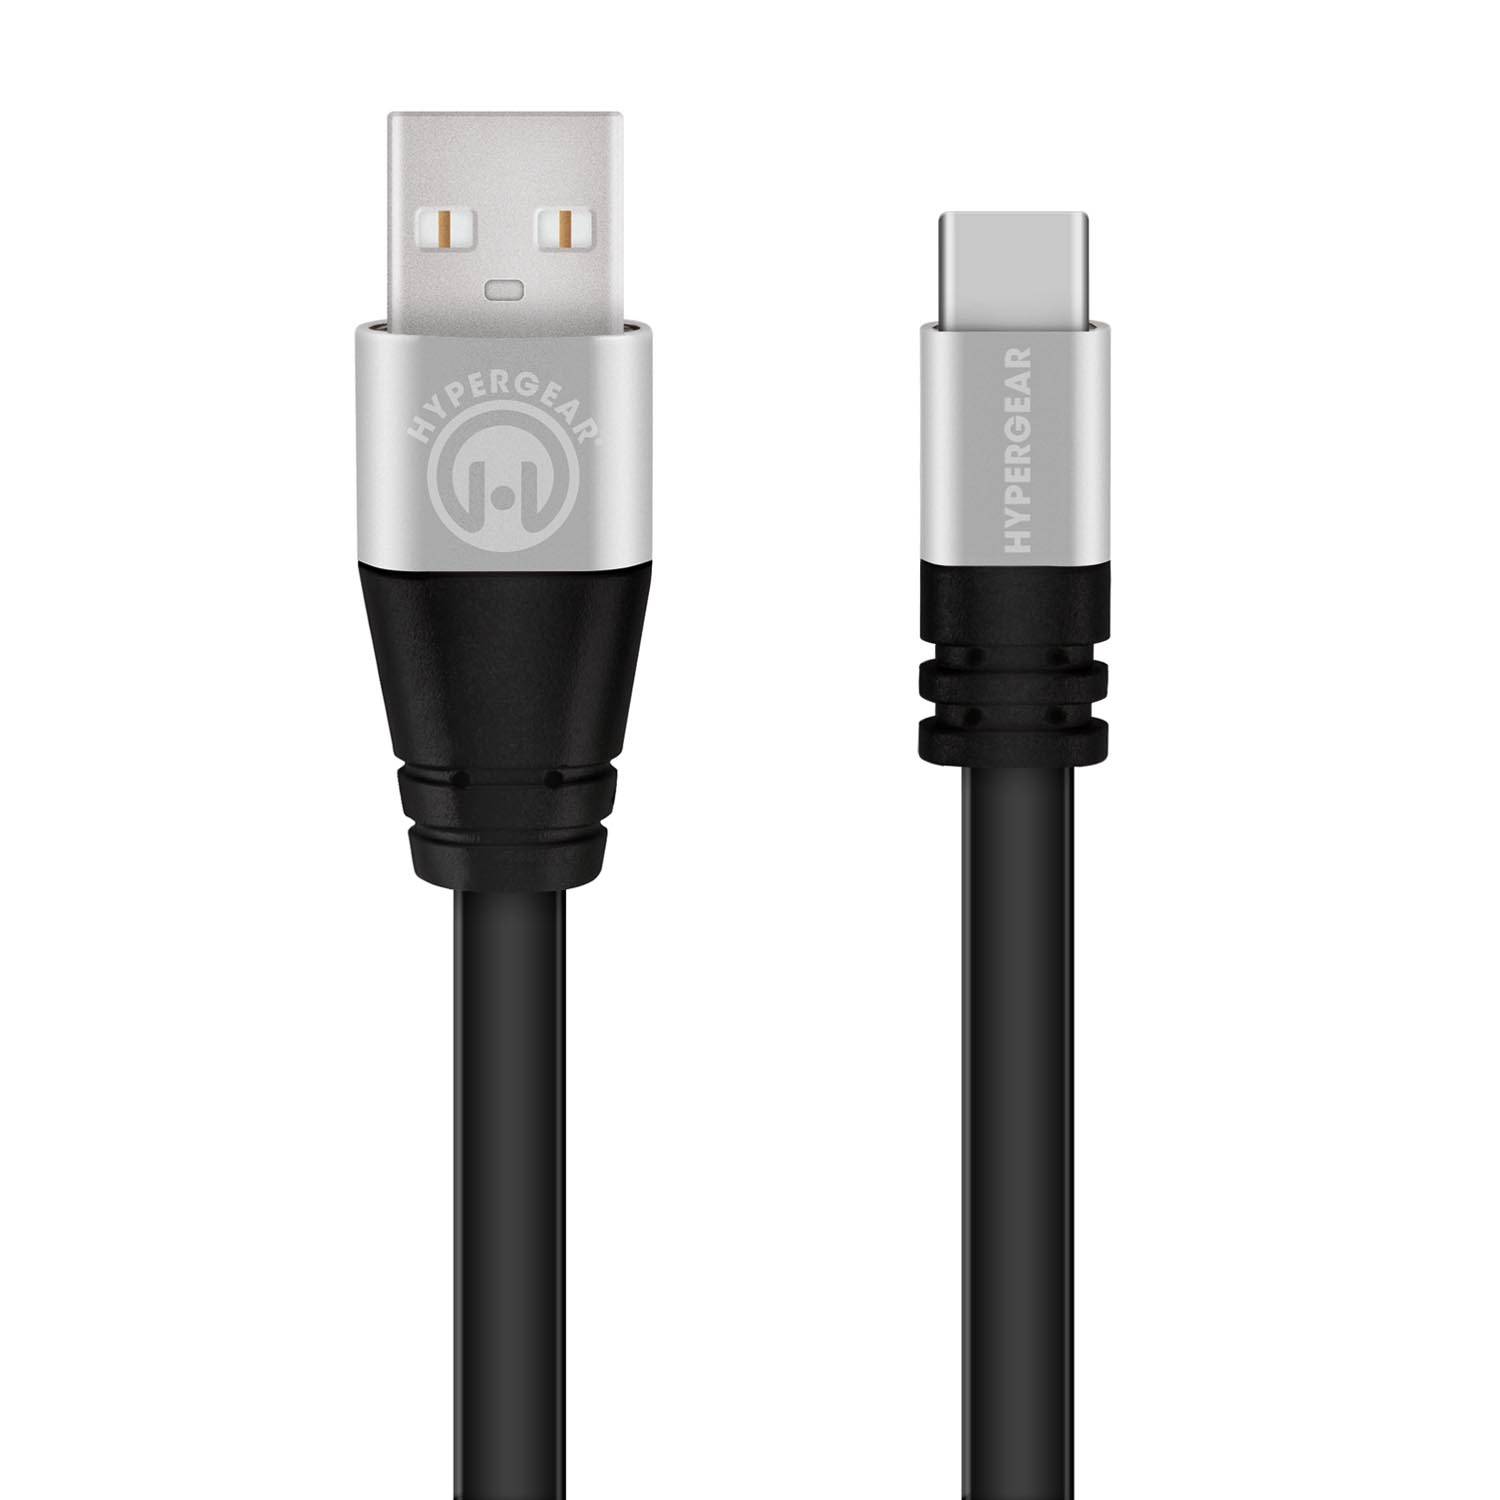 HyperGear Flexi USB-C Charge And Sync Flat Cable 10FT